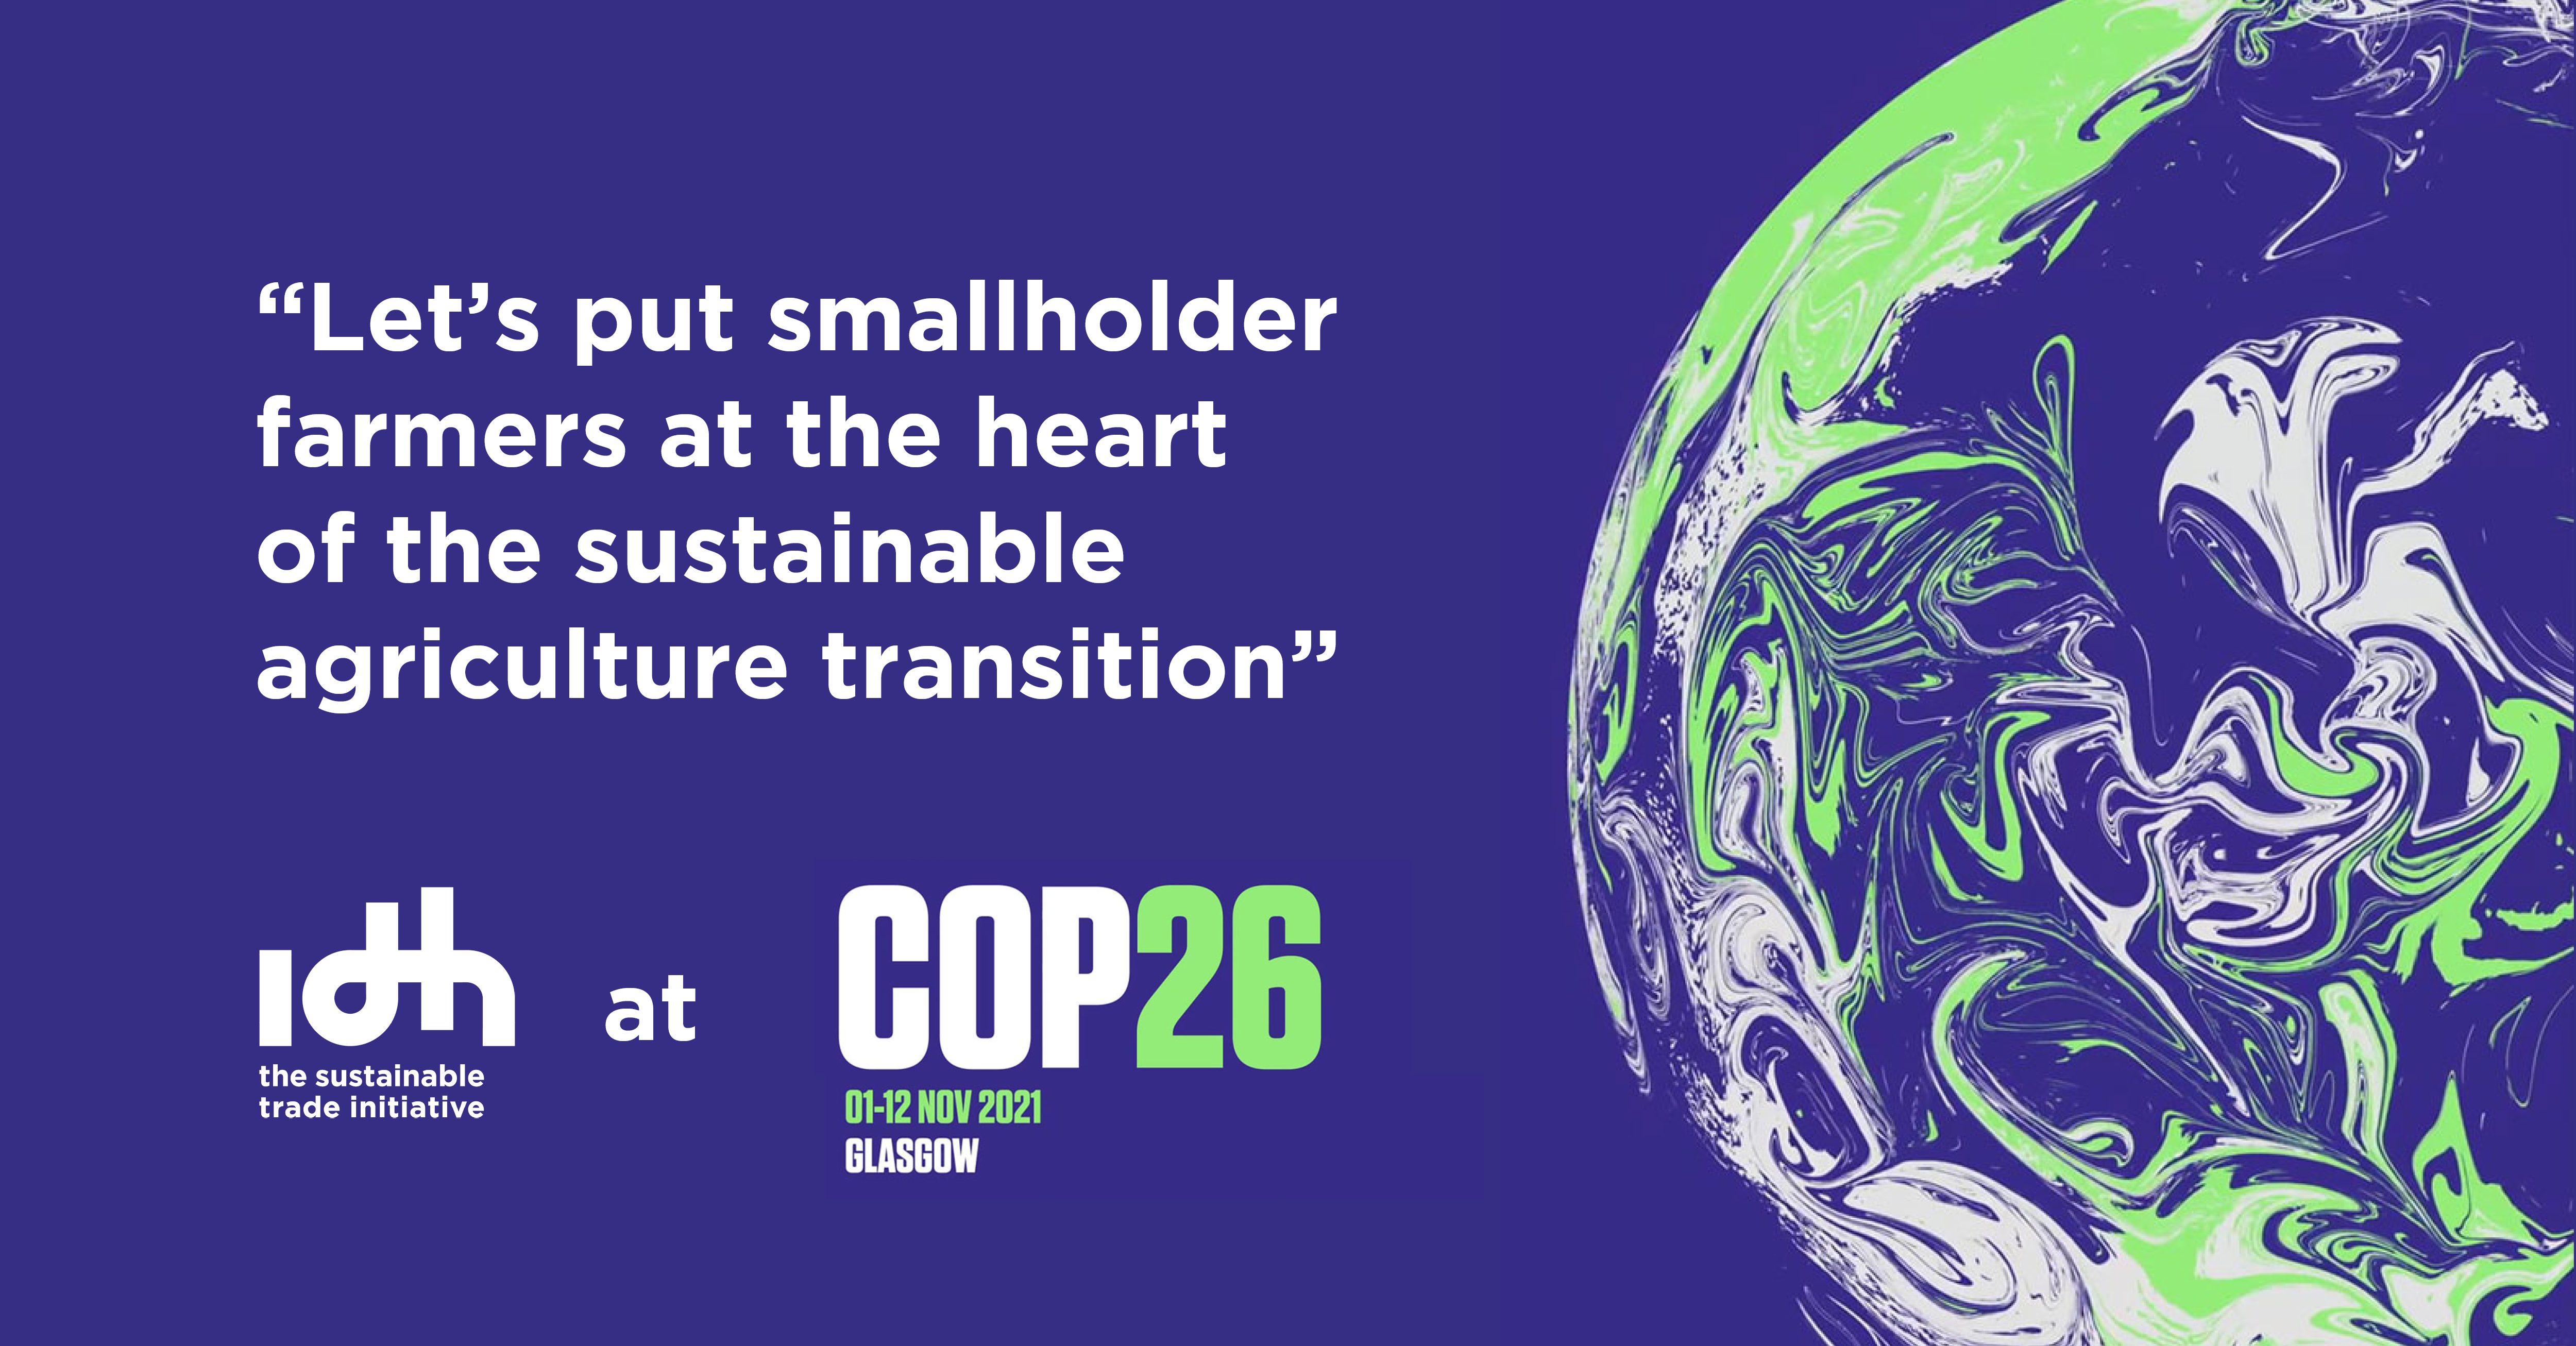 IDH at COP26 Let's put smallholder farmers at the heart of the sustainable agriculture transition